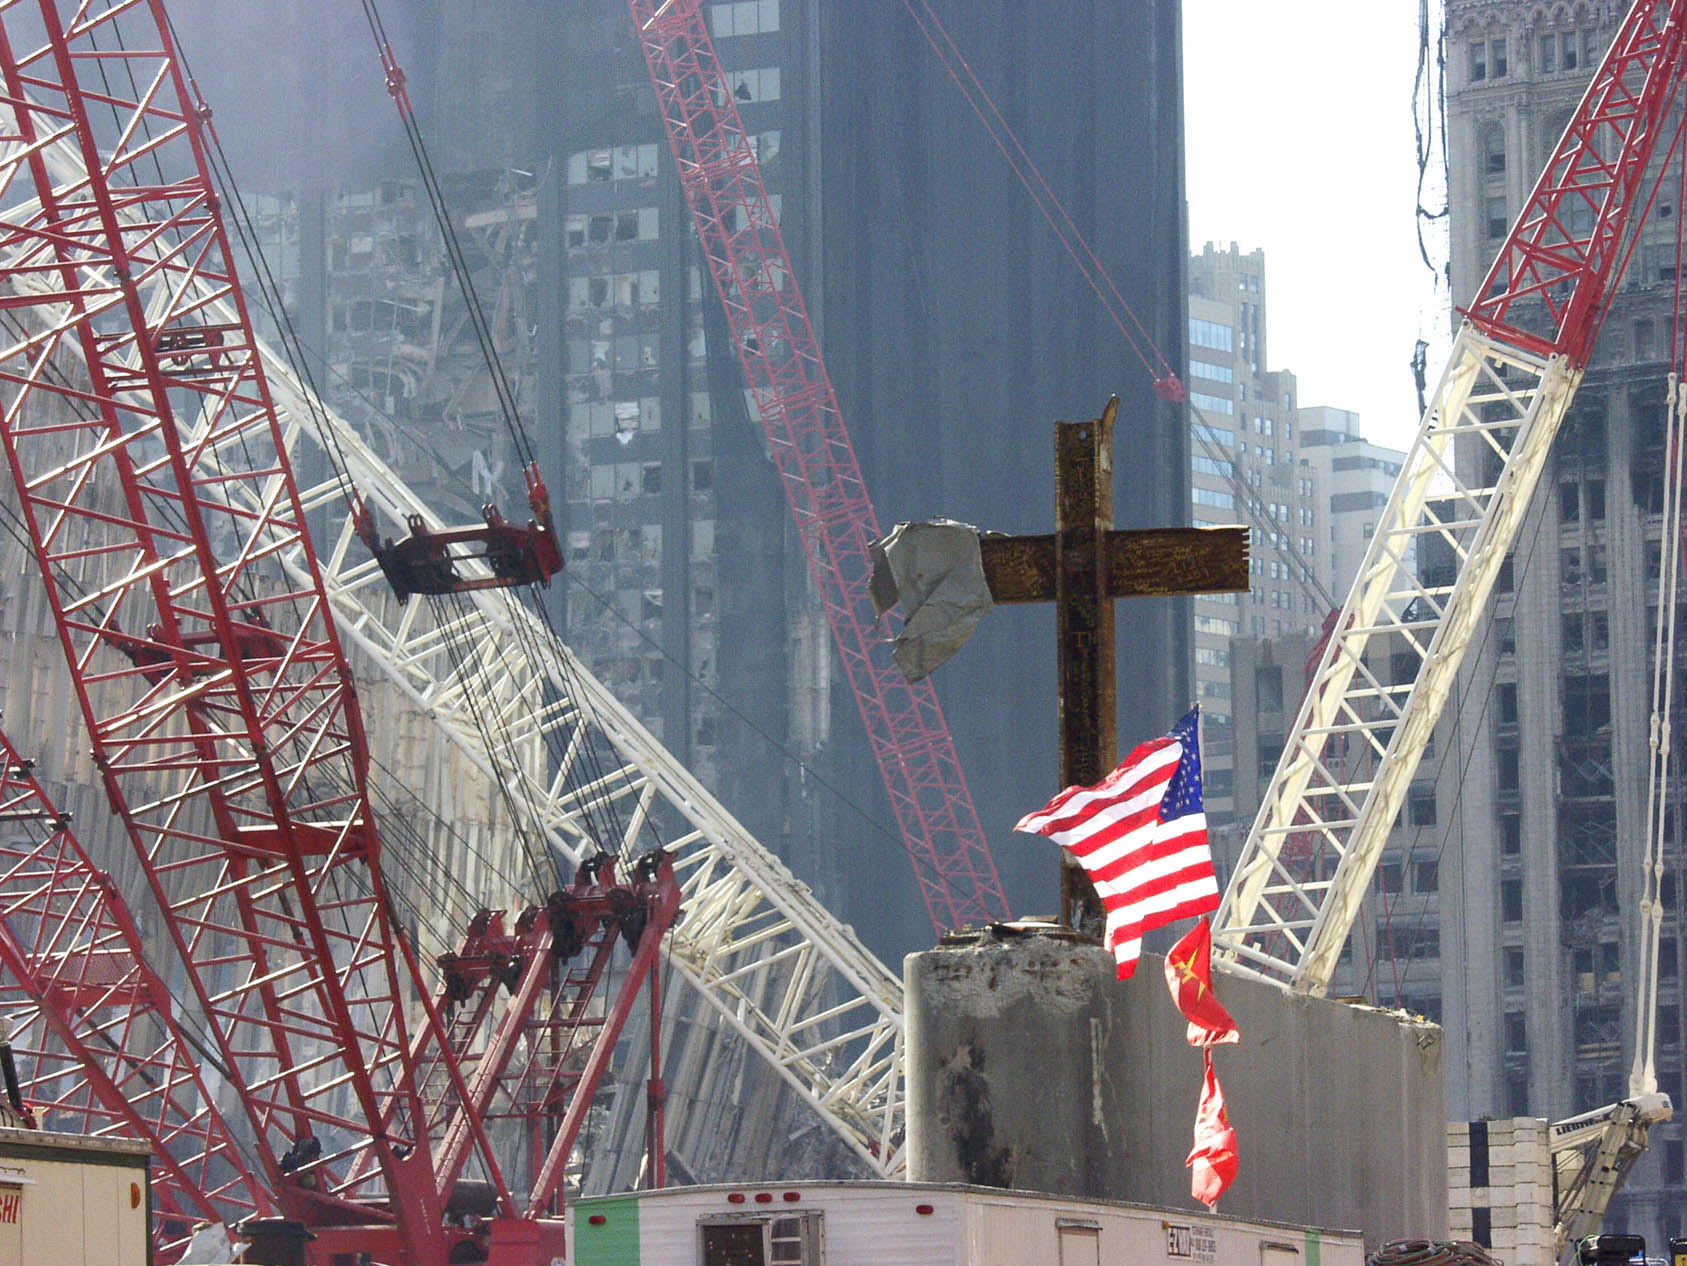 WTC clean up site - Beams in shape of cross with USA Flag flying in the forground